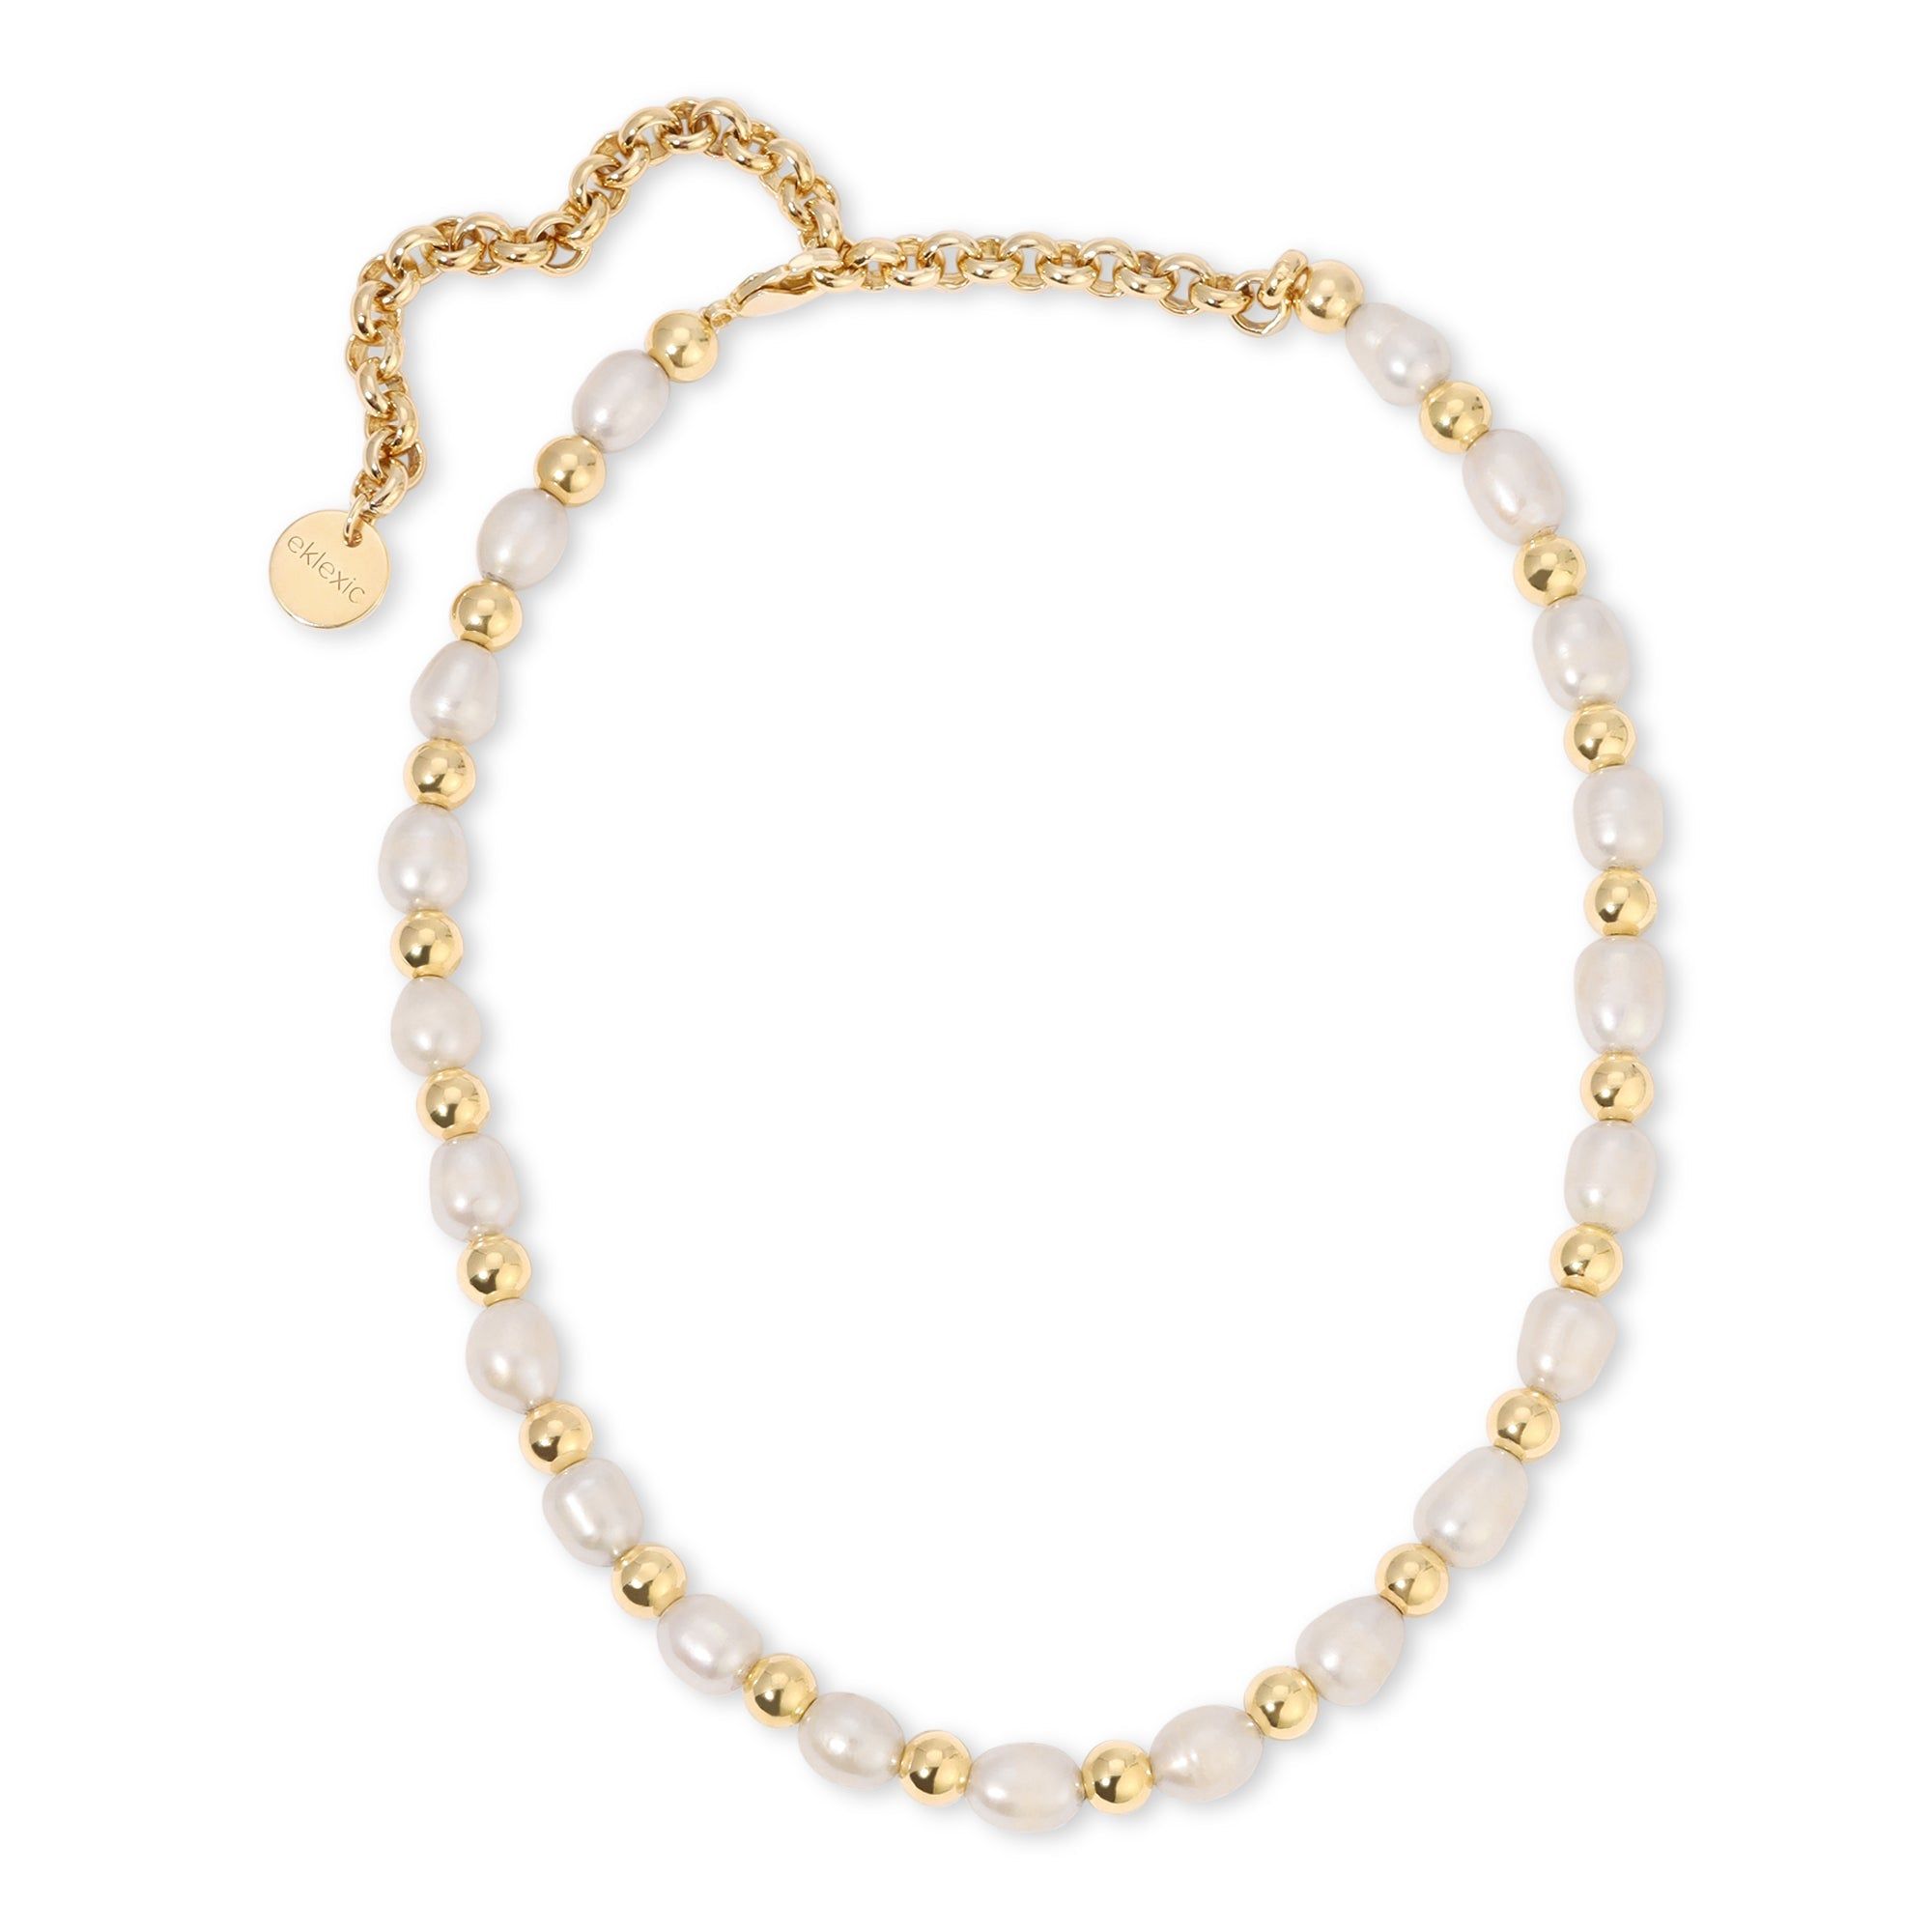 a gold and white beaded bracelet